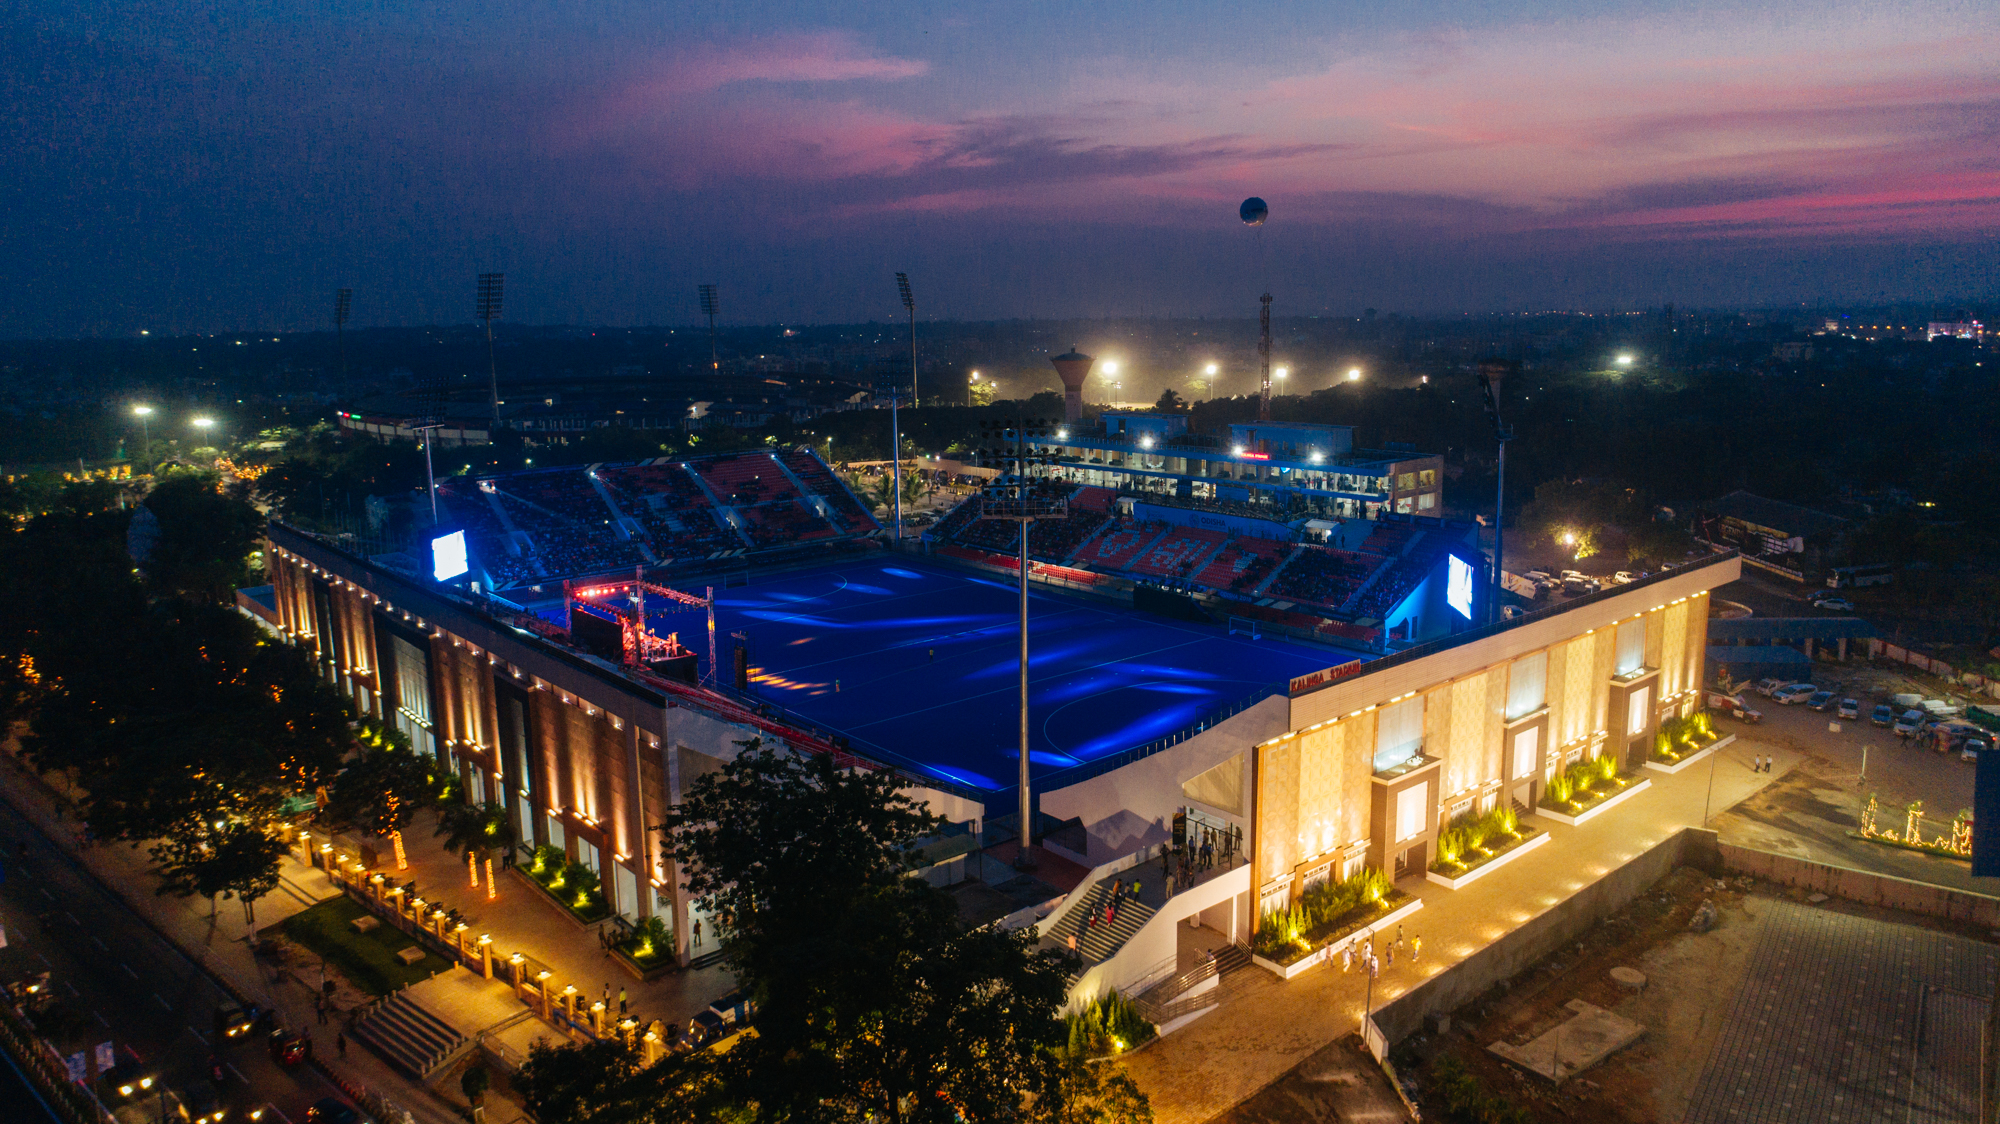 Men’s Hockey World Cup | Kalinga Stadium can become one of the top five stadiums in world, says FIH president